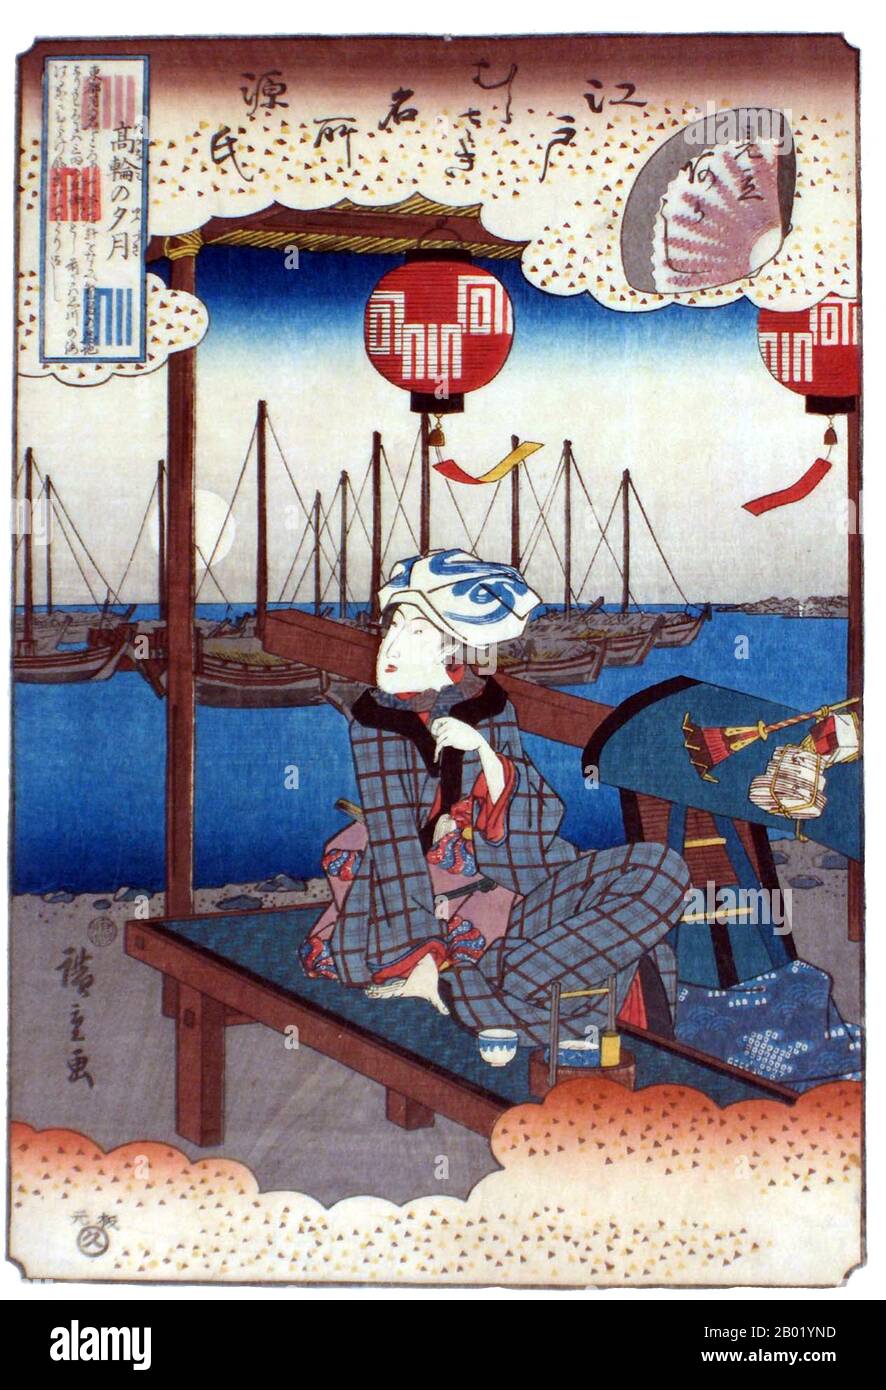 Utagawa Hiroshige (歌川 広重, 1797 – October 12, 1858) was a Japanese ukiyo-e artist, and one of the last great artists in that tradition. He was also referred to as Andō Hiroshige (安藤 広重) (an irregular combination of family name and art name) and by the art name of Ichiyūsai Hiroshige (一幽斎廣重).  Bijinga (美人画 bijin-ga, lit. 'beautiful person picture') is a generic term for pictures of beautiful women in Japanese art, especially in woodblock printing of the ukiyo-e genre, which predate photography. The term can also be used for modern media, provided the image conforms to a somewhat classic represen Stock Photo